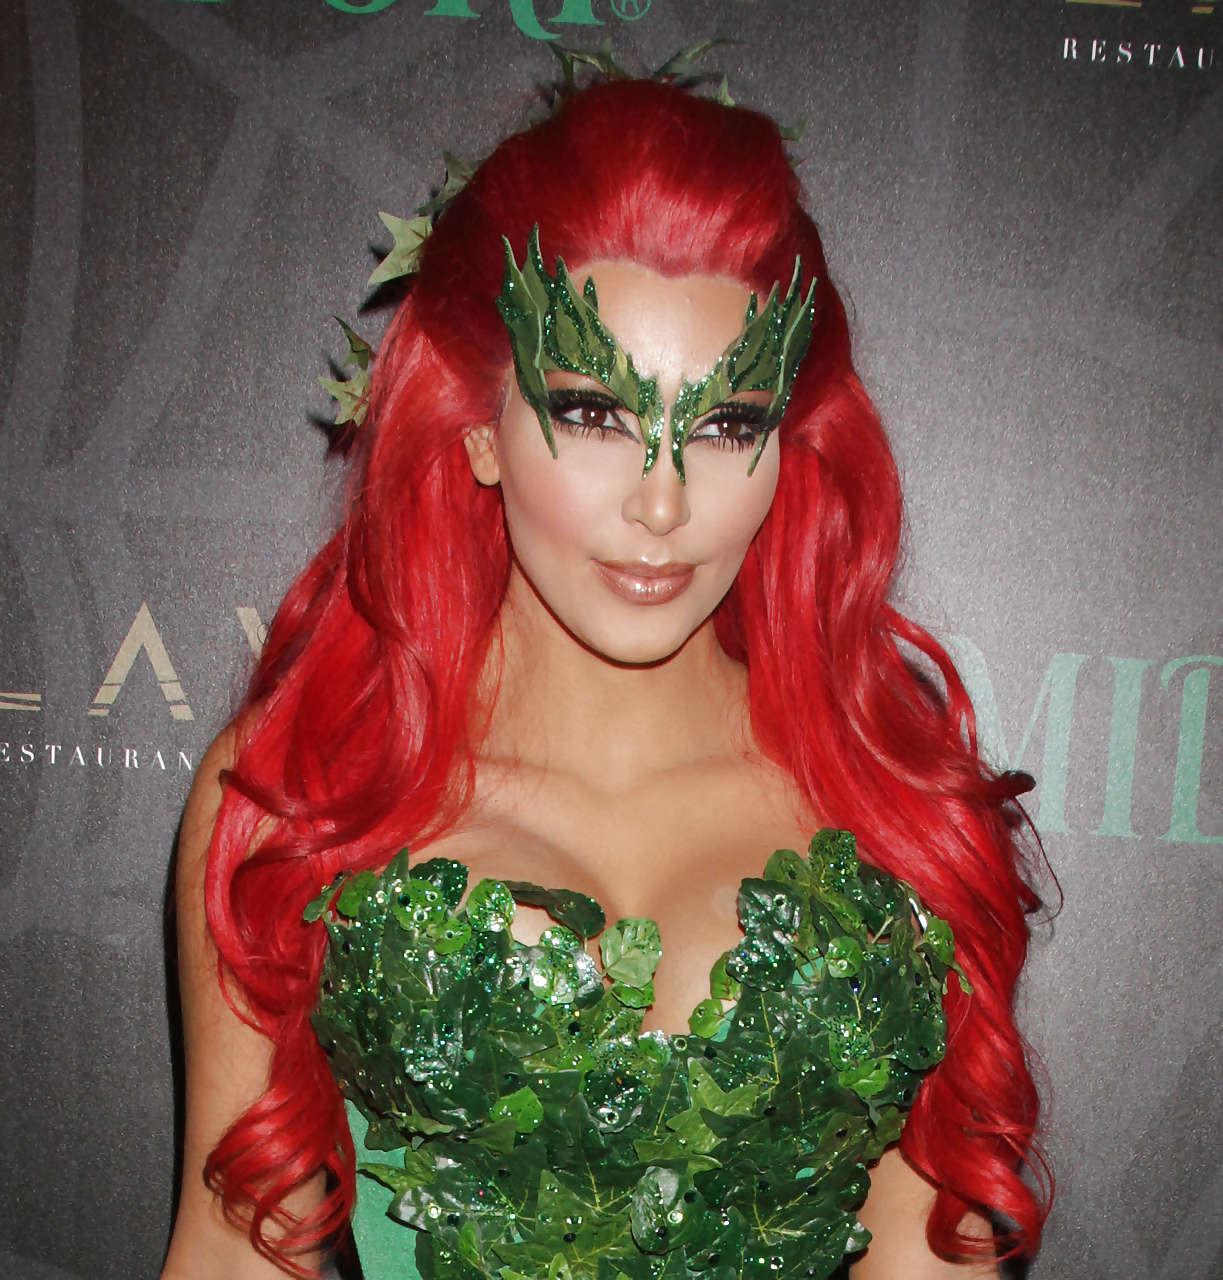 Kim Kardashian as redhair in Poison Ivy costume for Helloween party #75284138